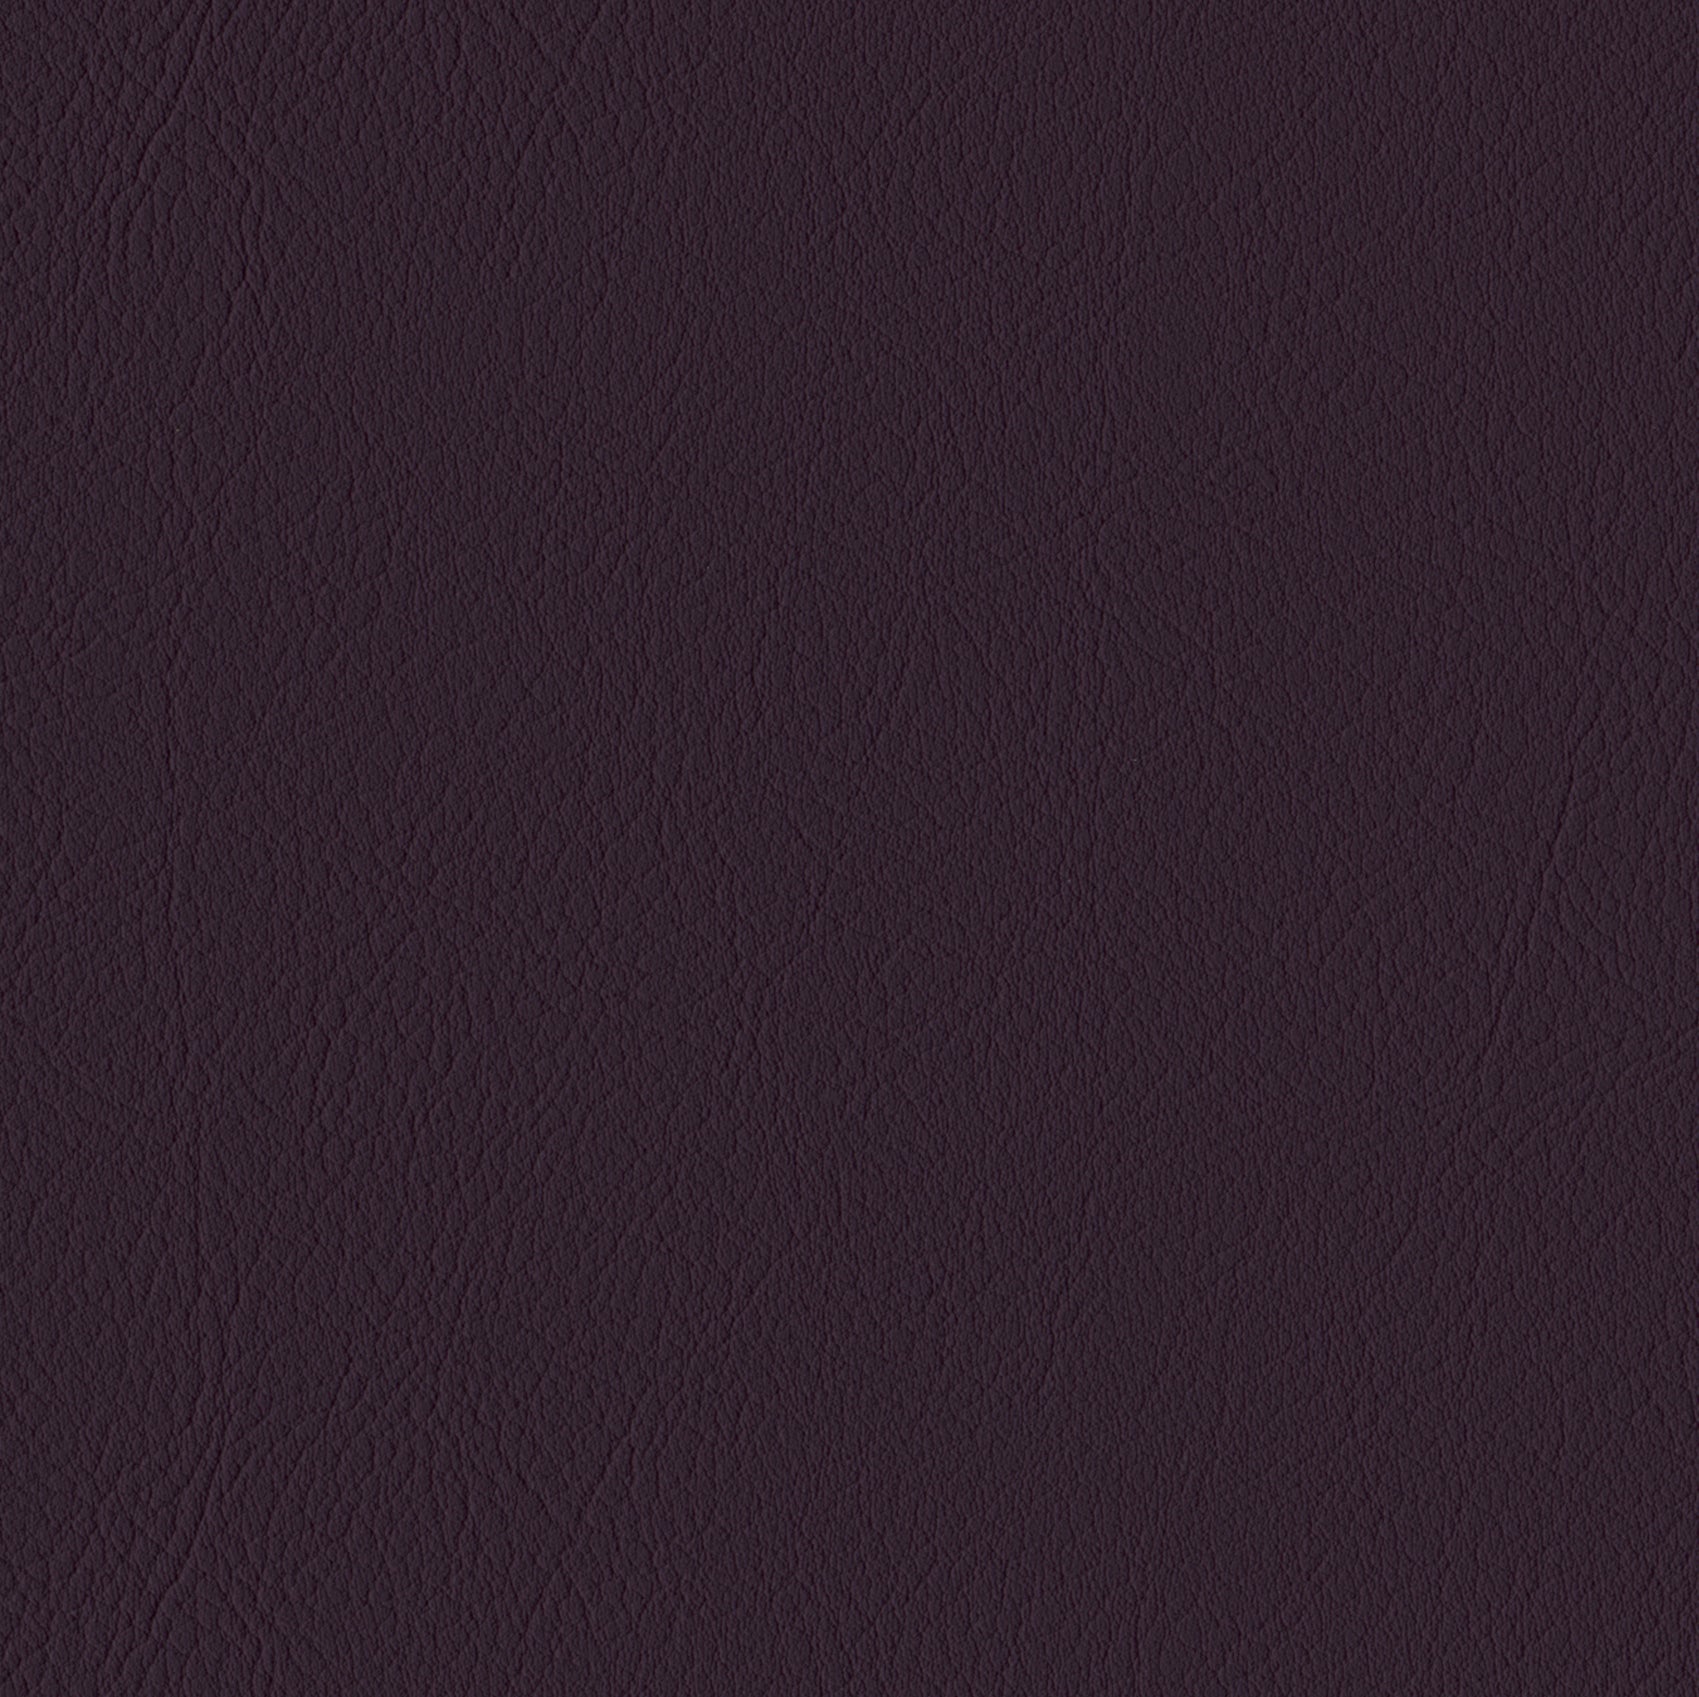 Andriali-Contract-Vinyl_Upholstery-Design-LegacyFR-Color-585Plum-Width-140cm